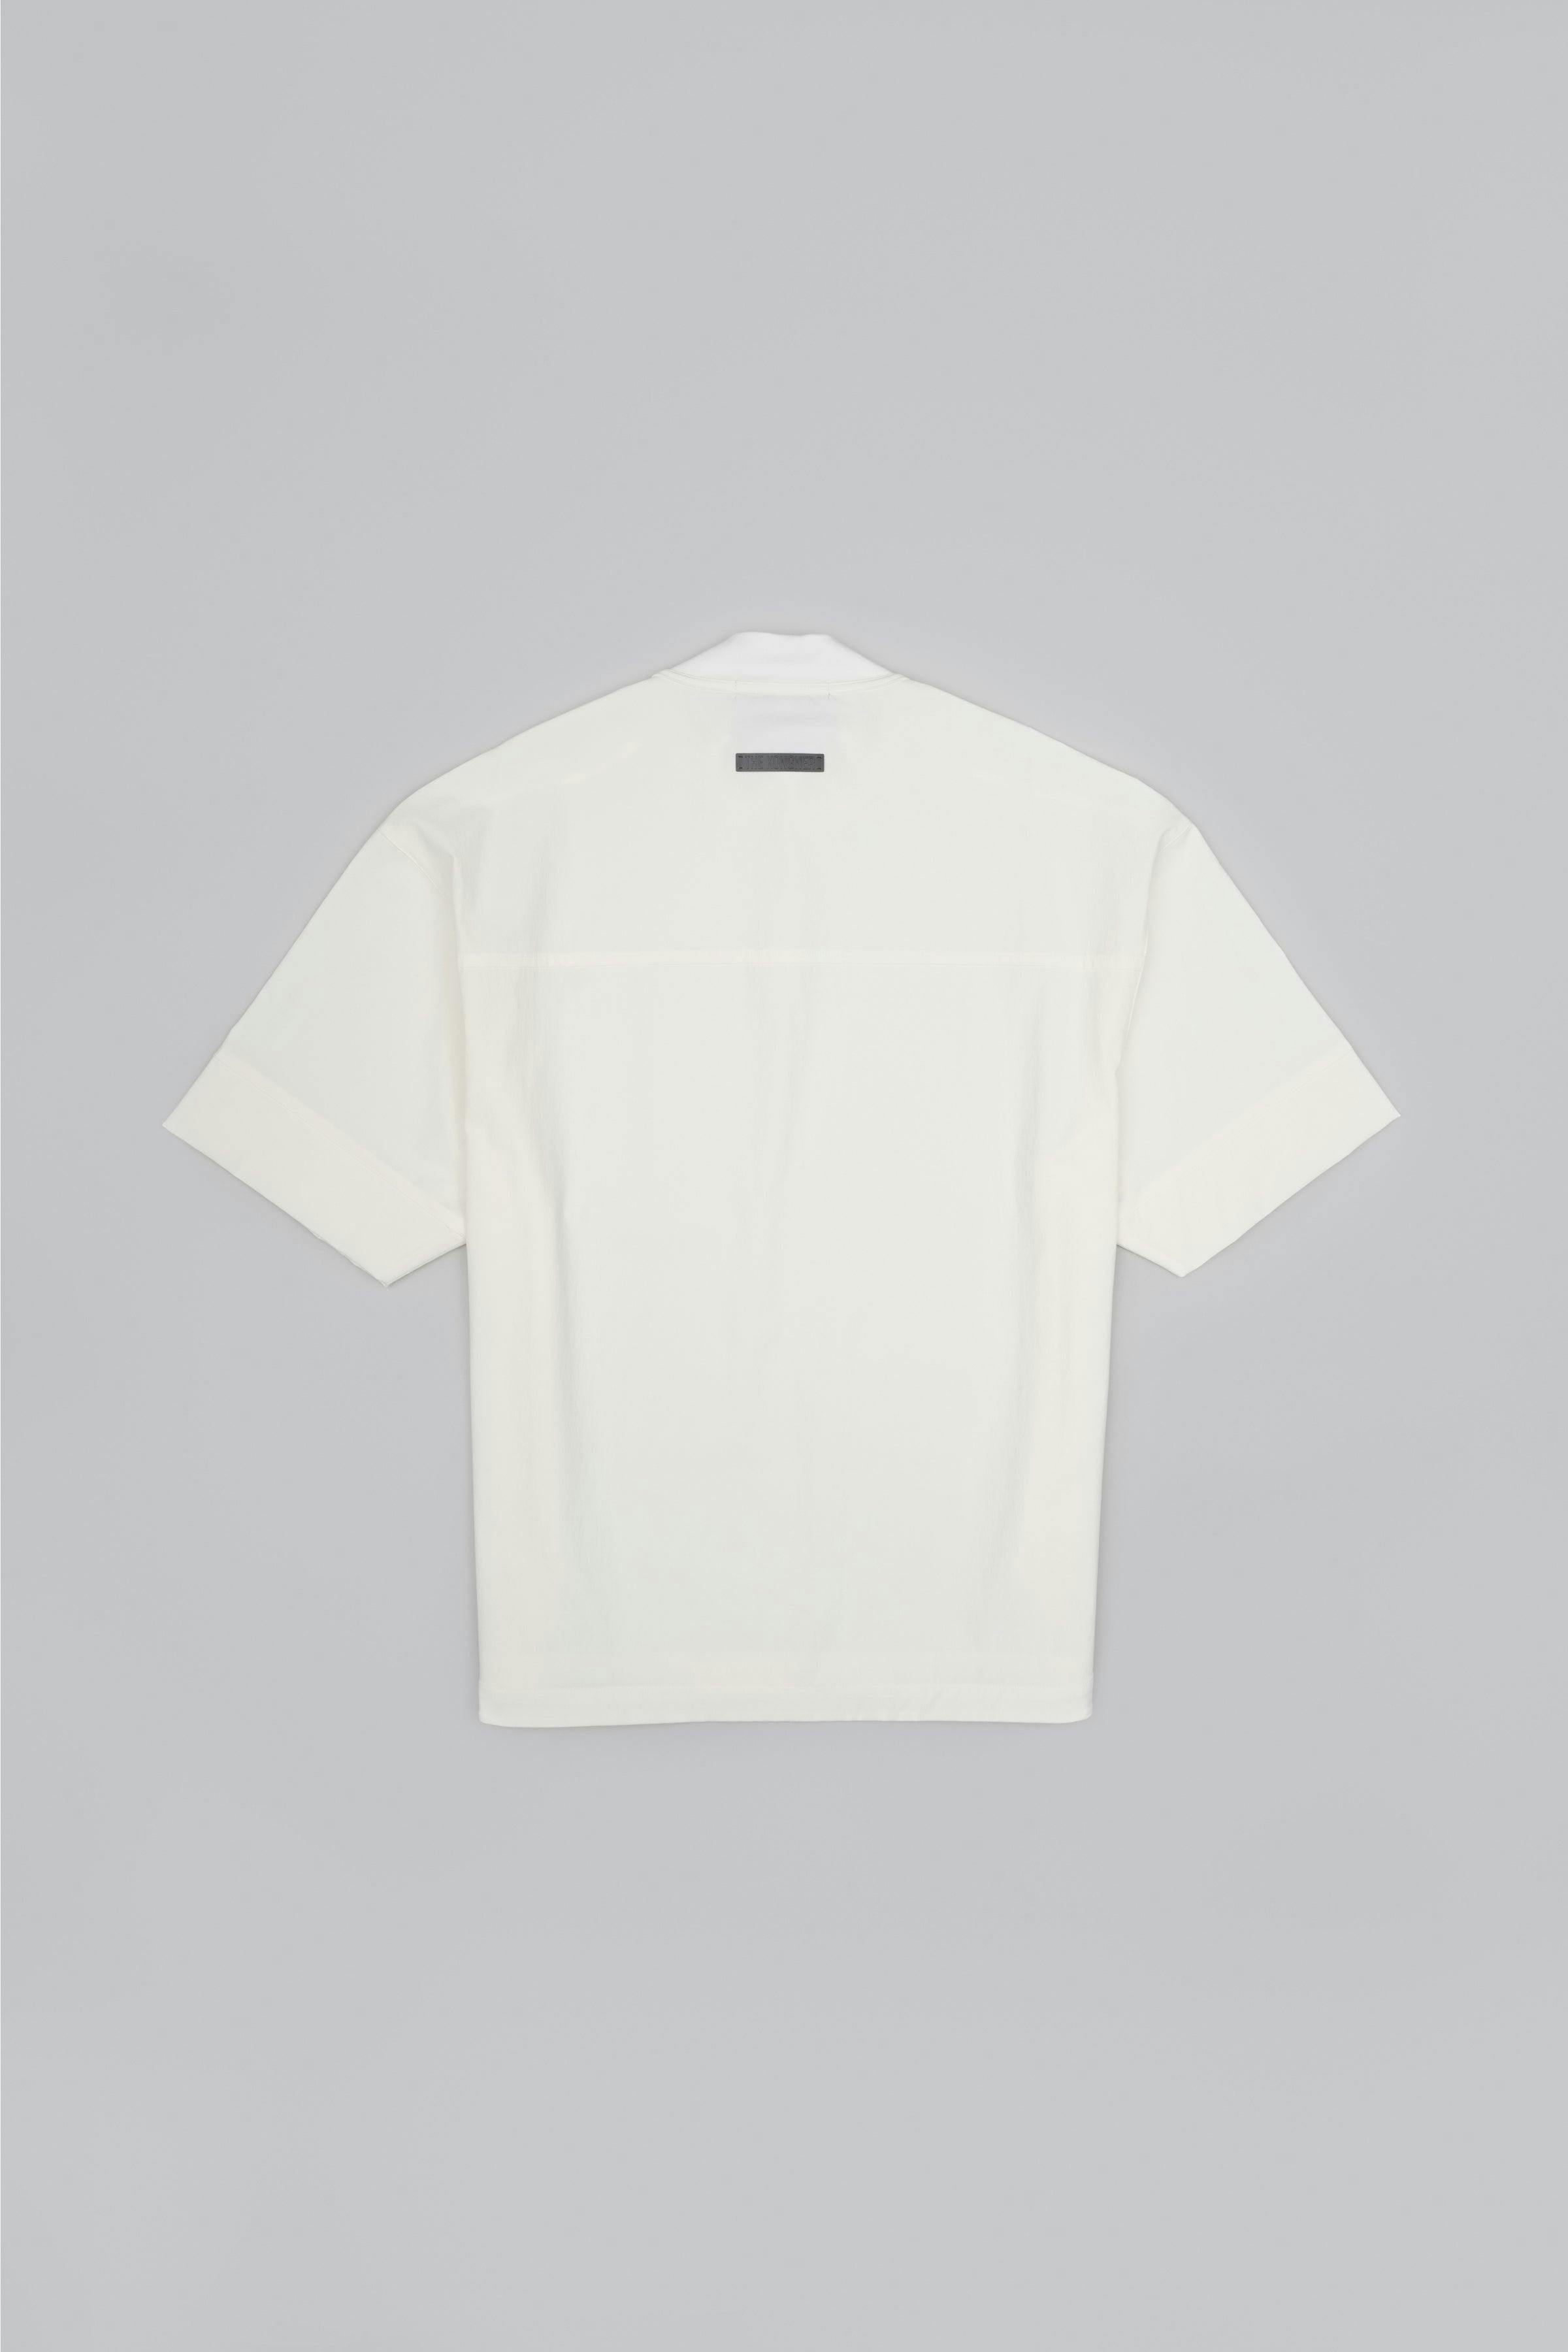 ˝INVERSE˝ Woven T-Shirt - Decayed White